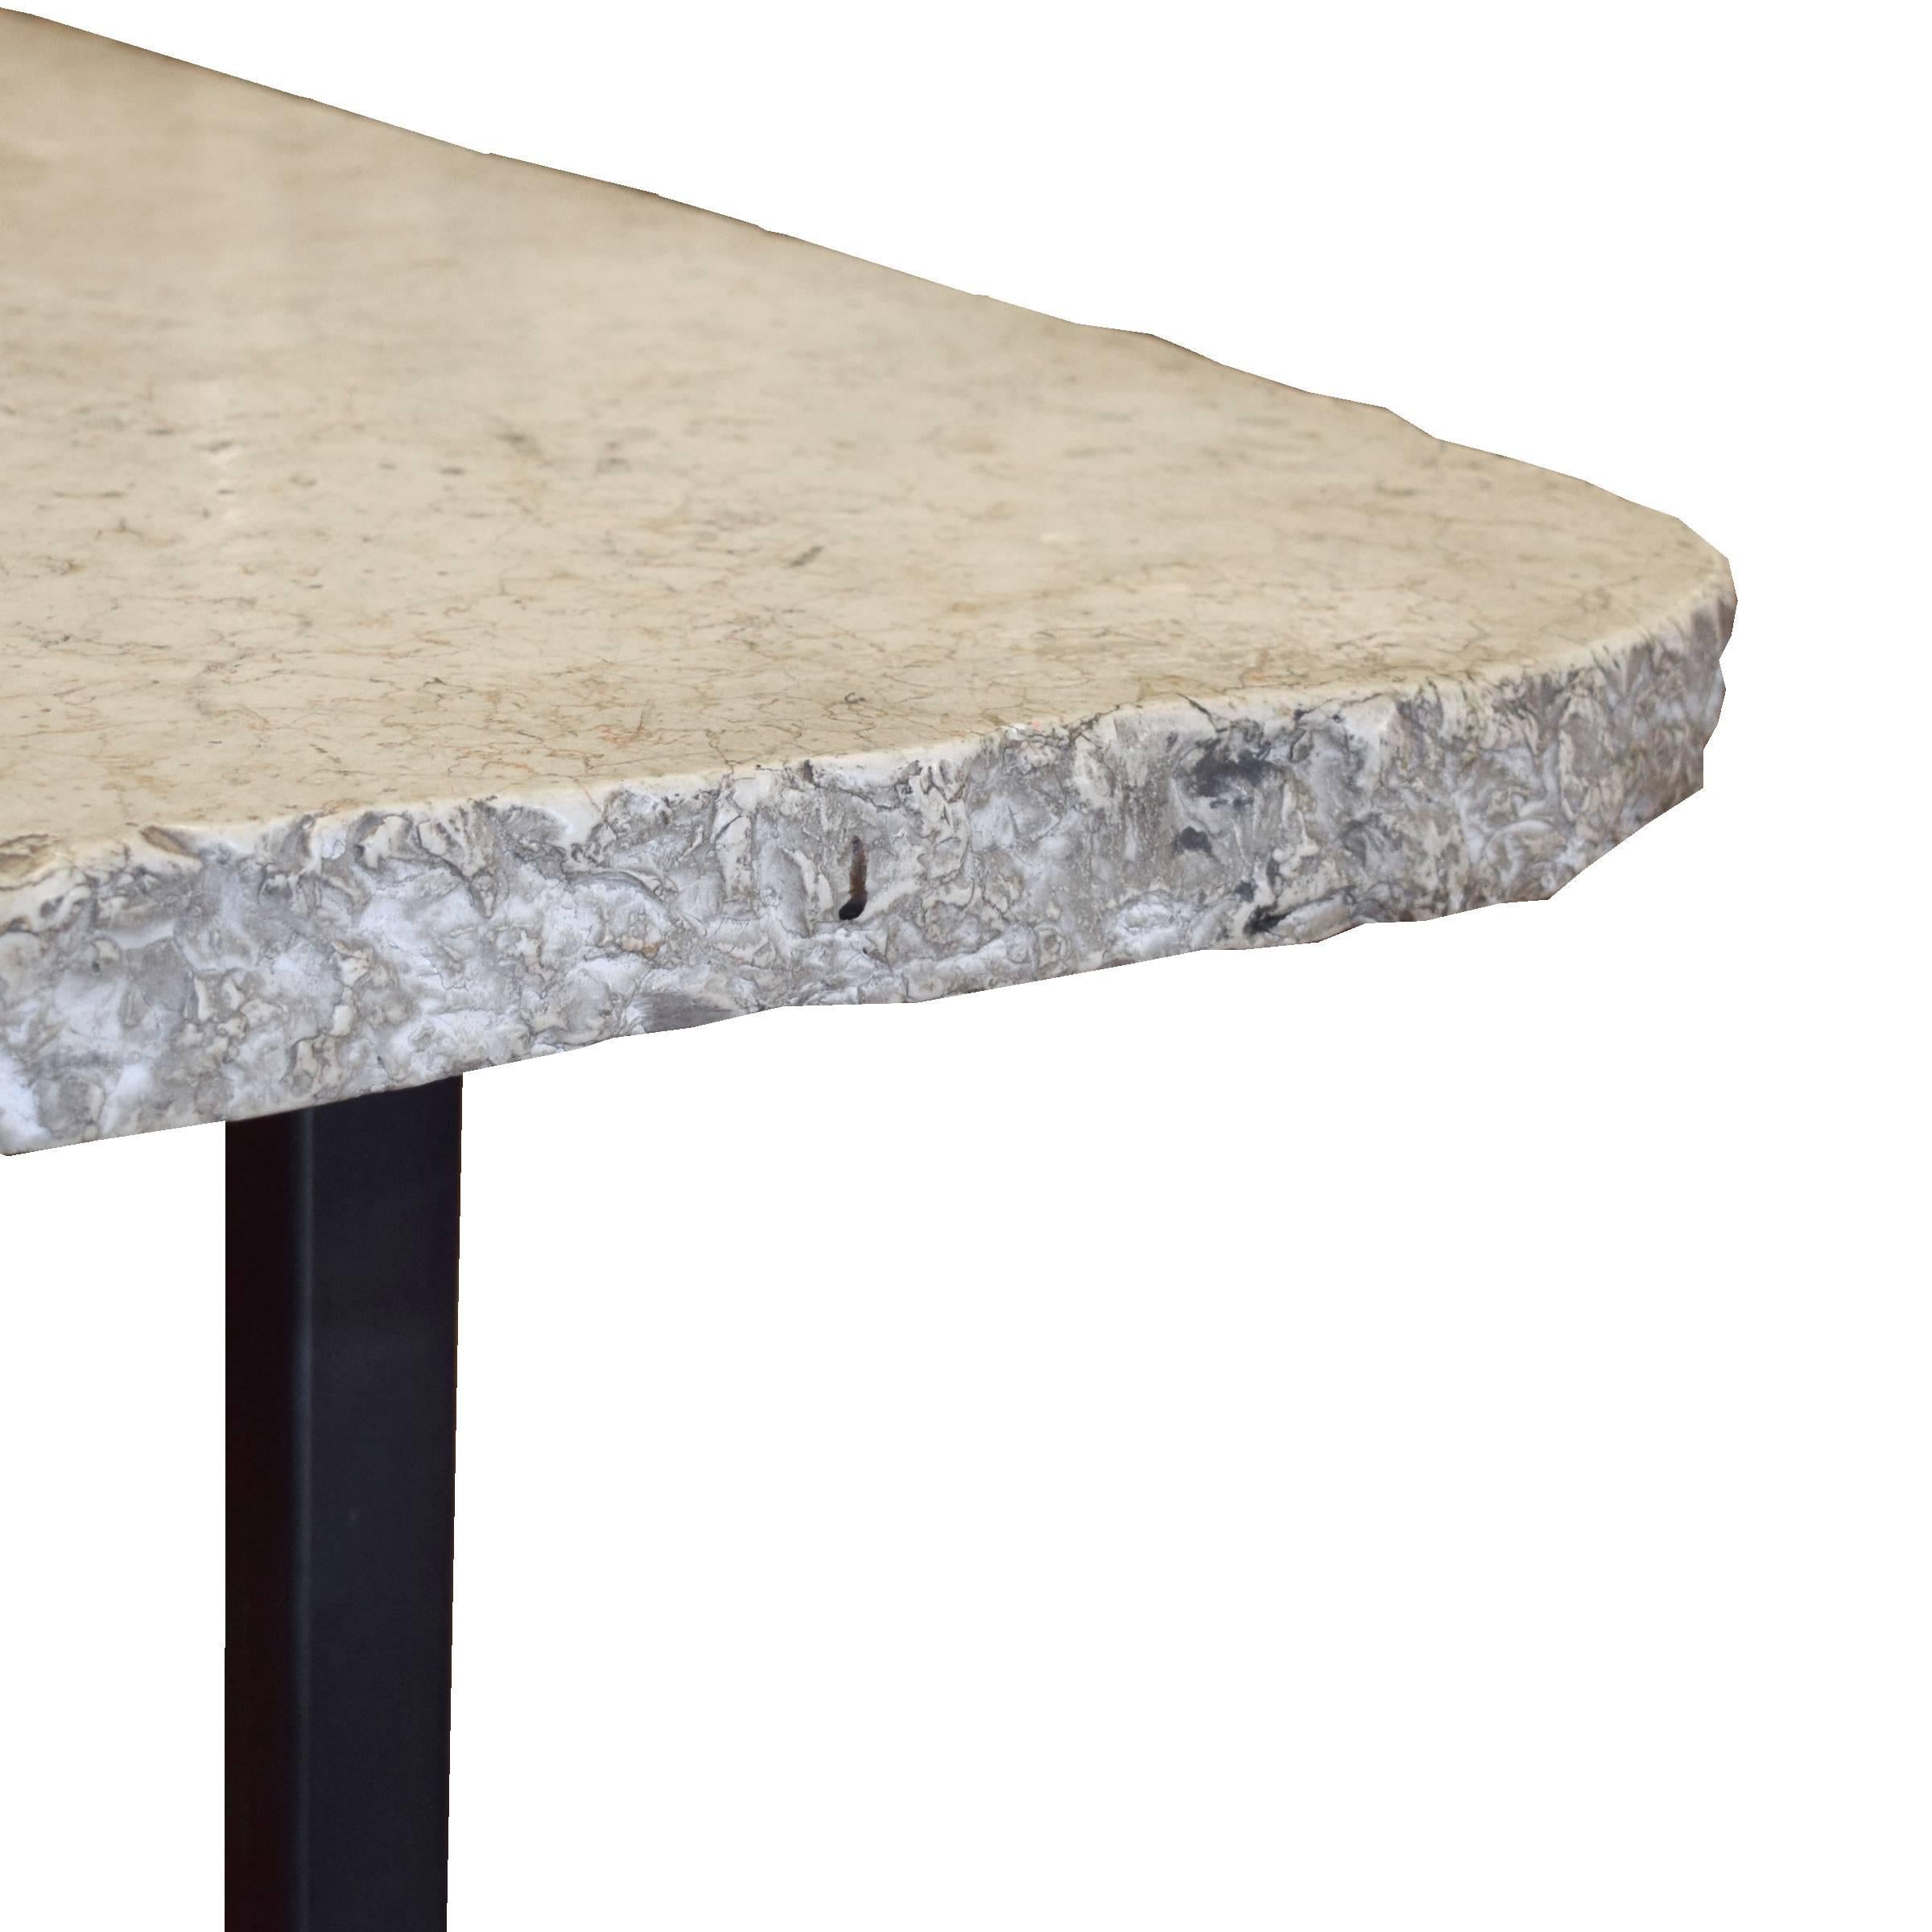 20th Century Argentine Marble-Top Low Table